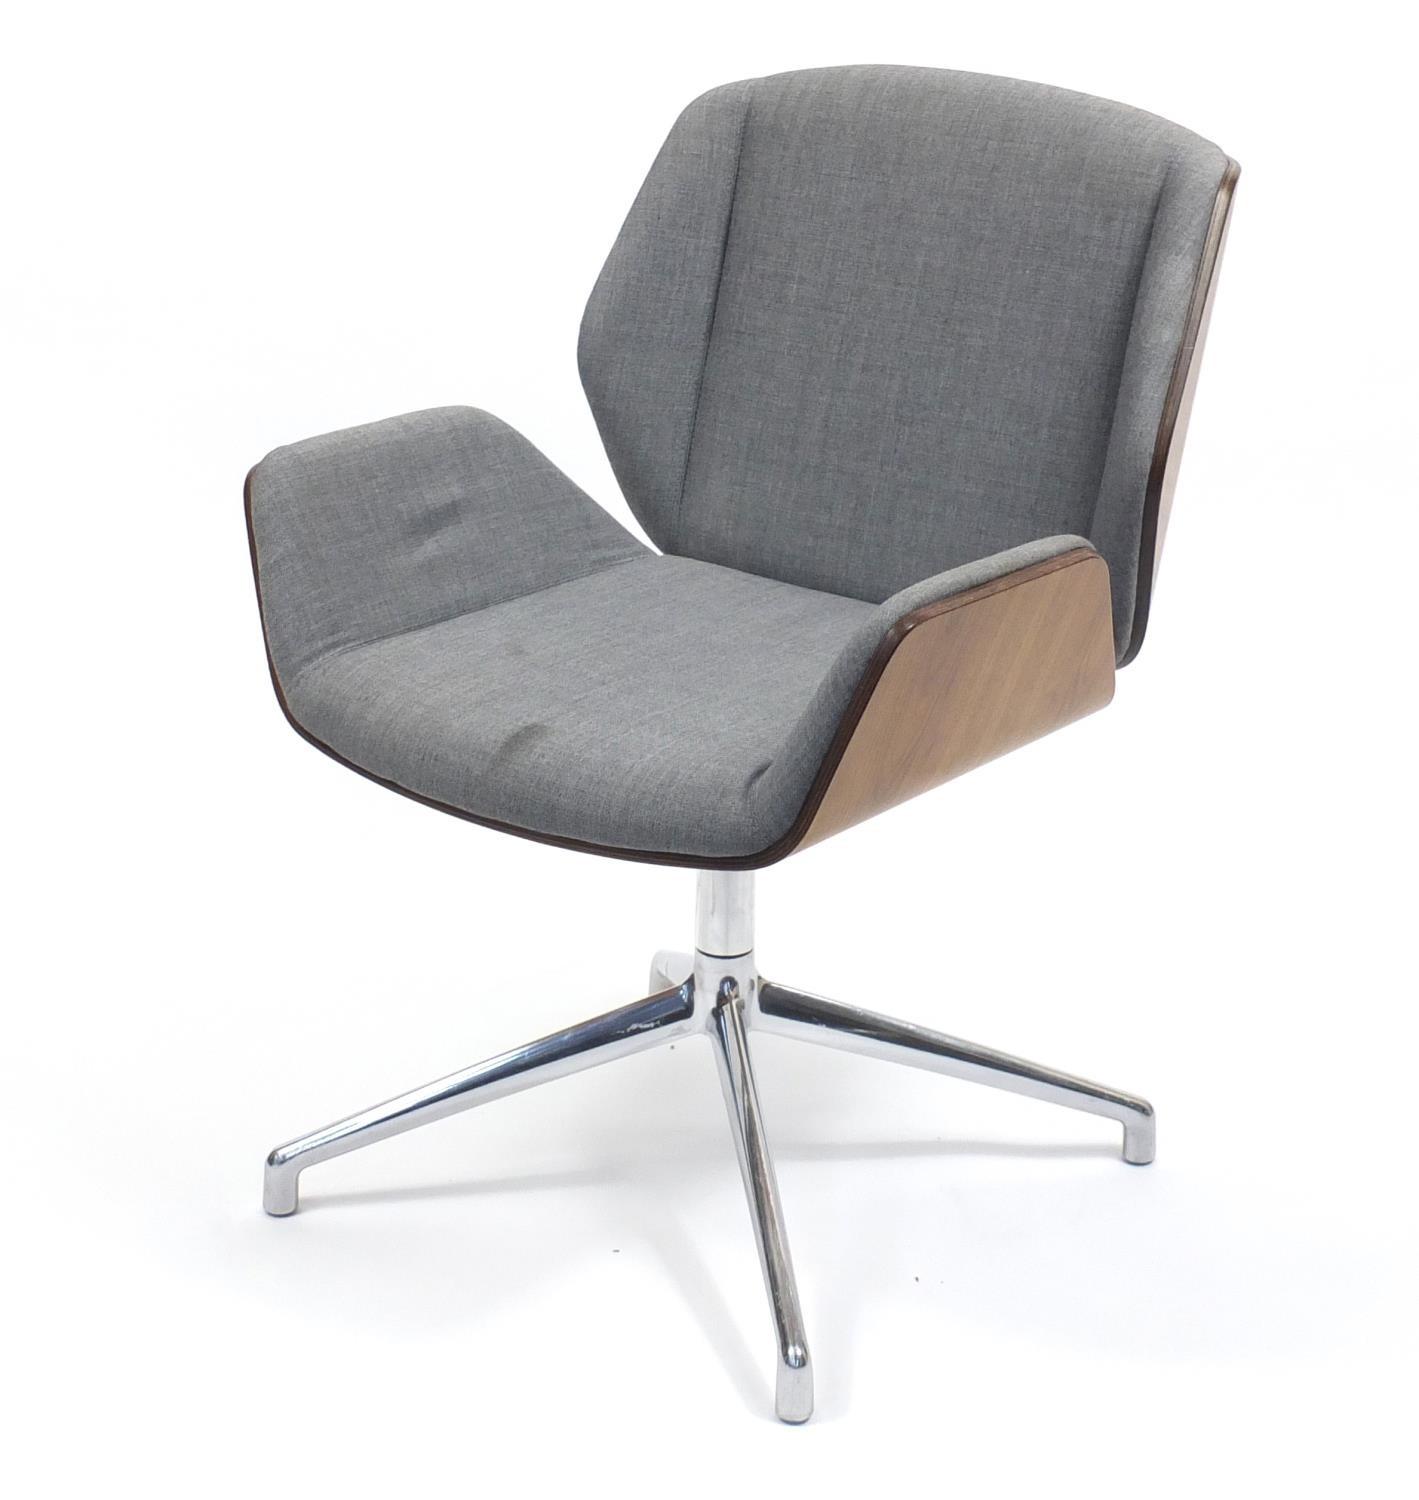 Boss design low back Kruze lounge chair, 84cm high, retail price ?1489.00 : For Further Condition